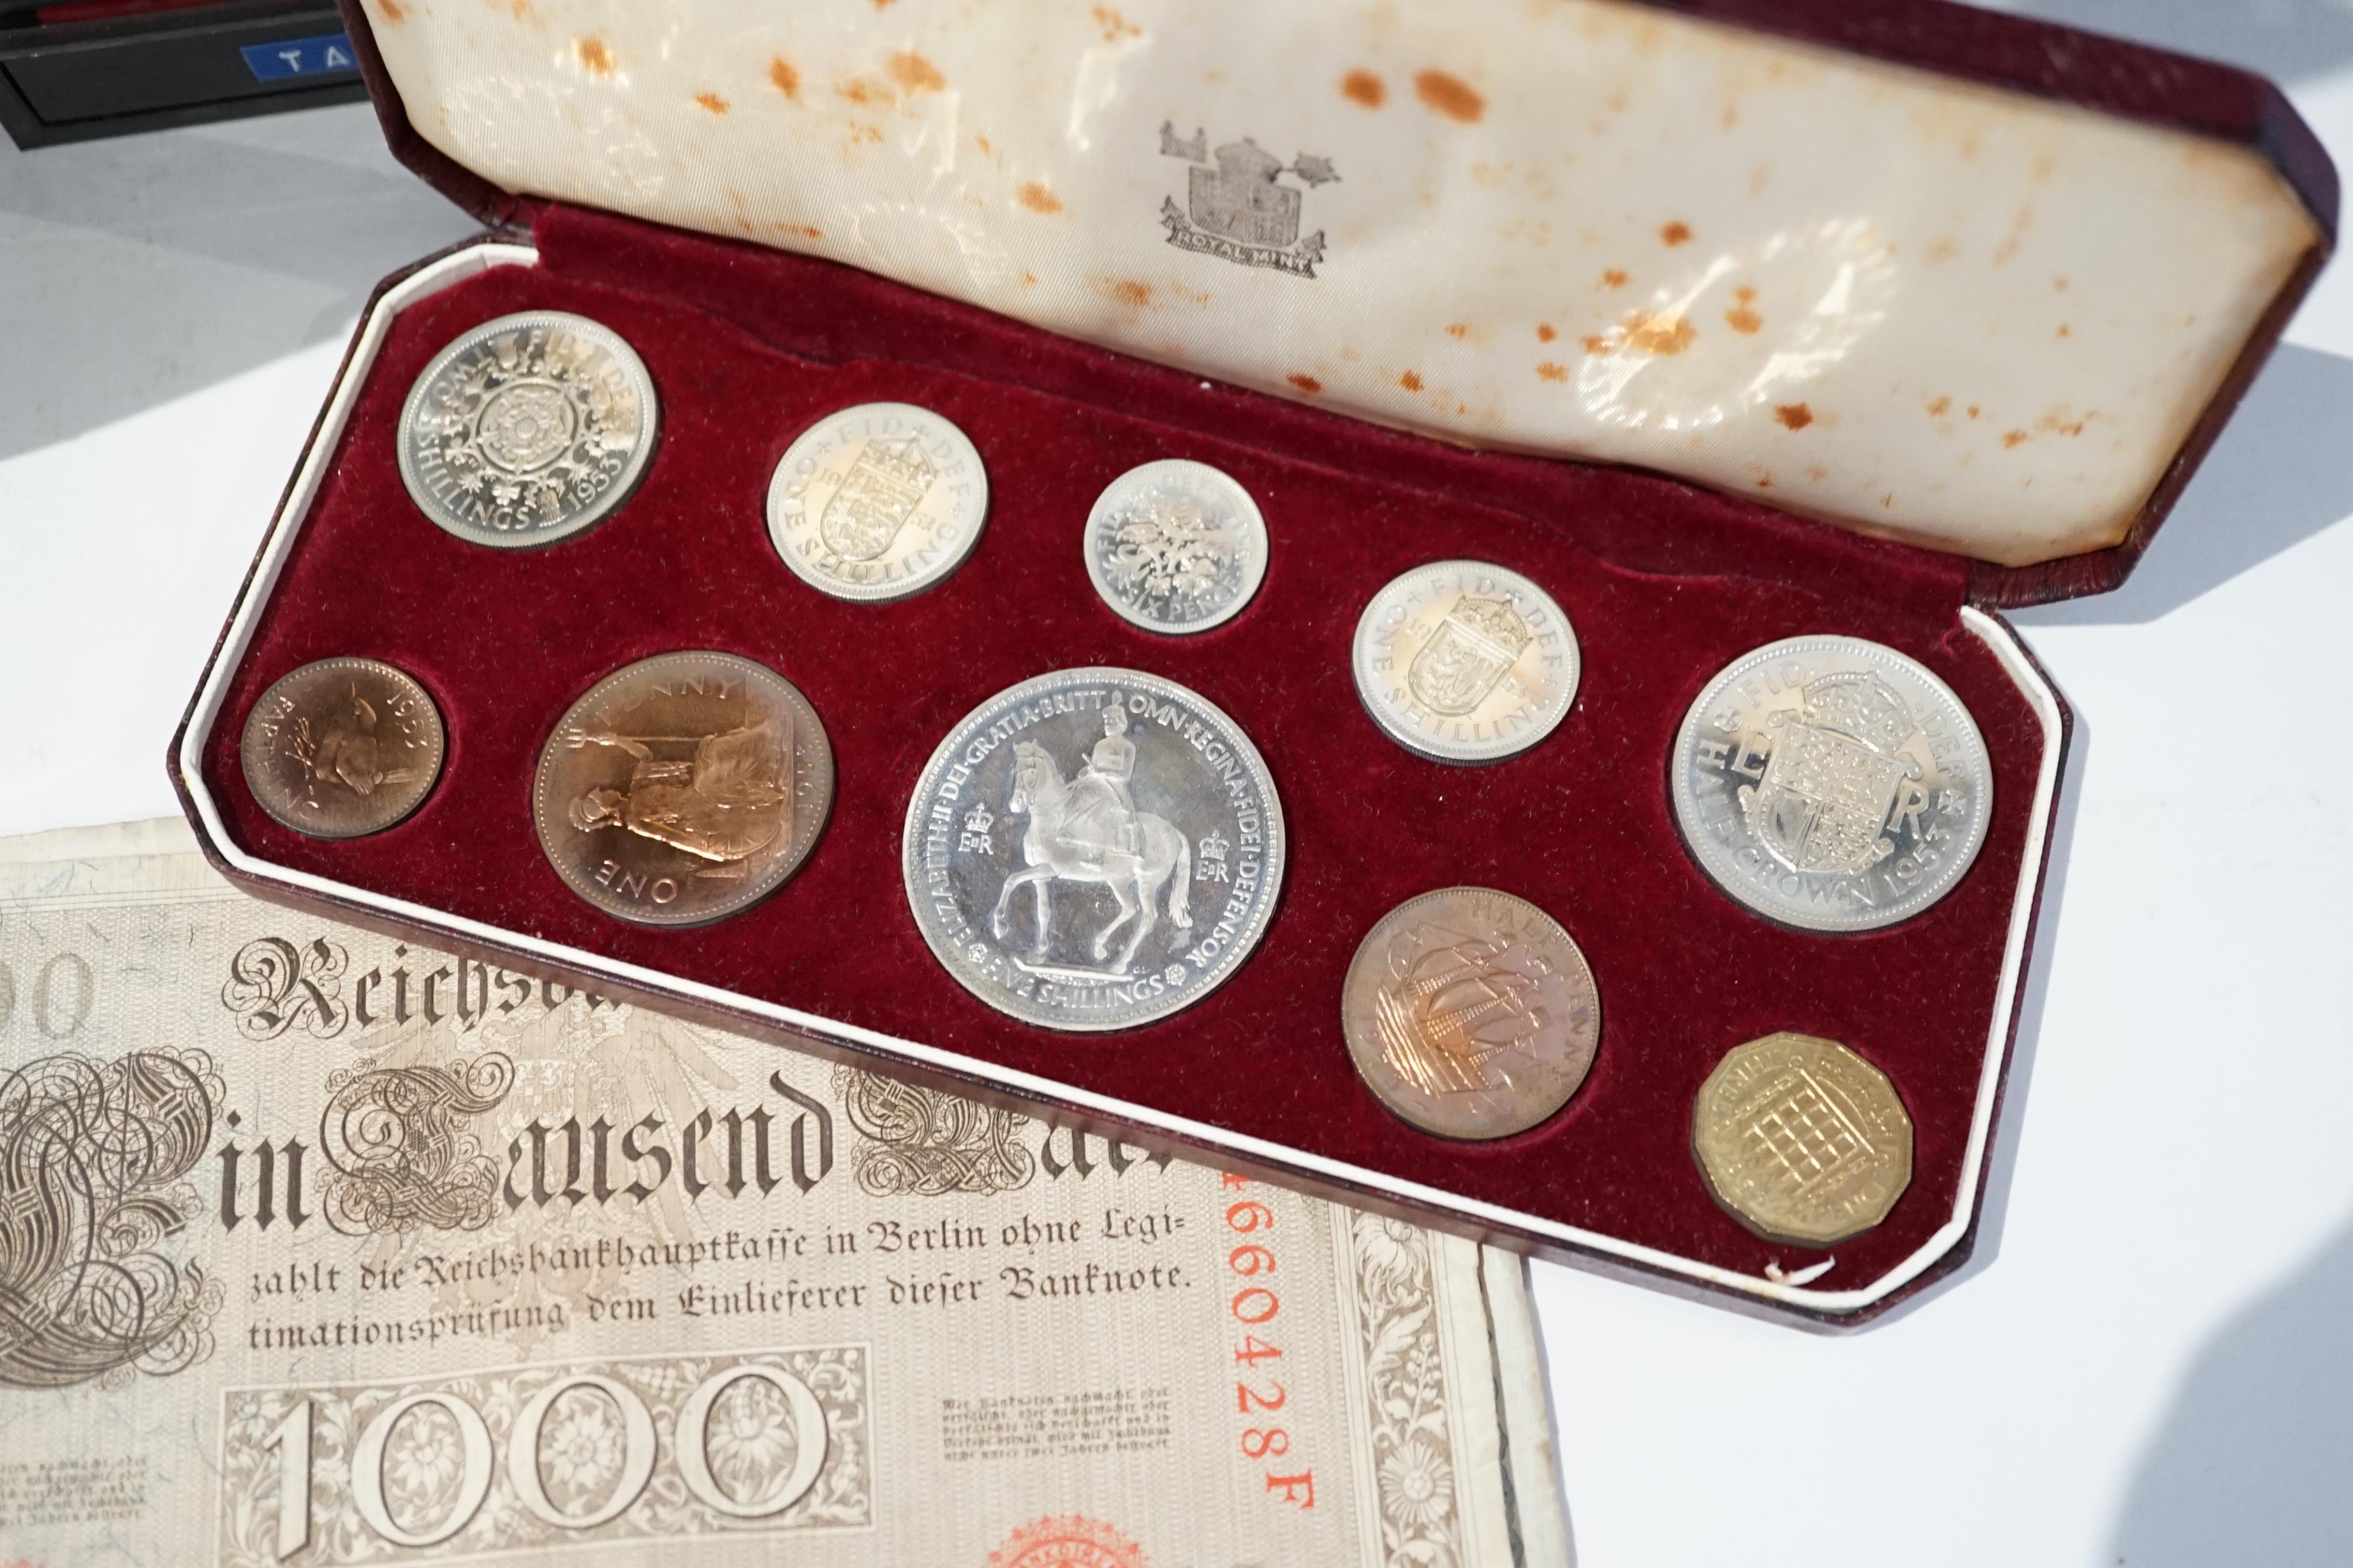 British and World coins and banknotes, to include Elizabeth II coronation proof coin set, 1953, case spotted, various George III to George VI silver crowns to maundy 2d etc.